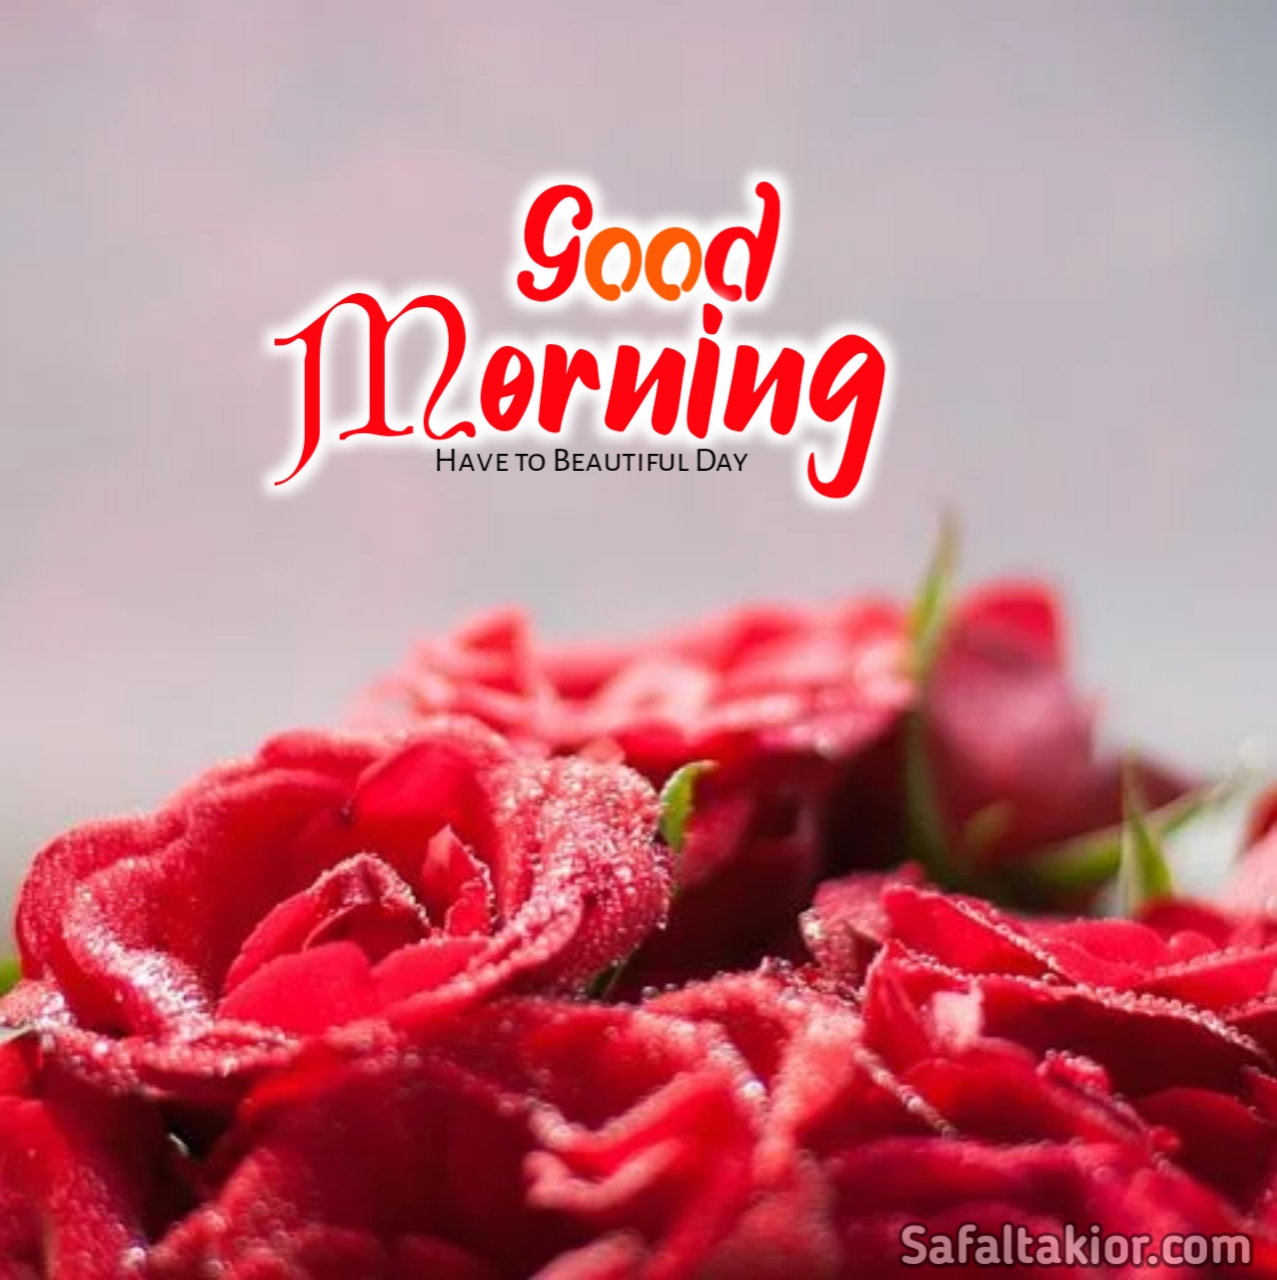 "good morning images flowers